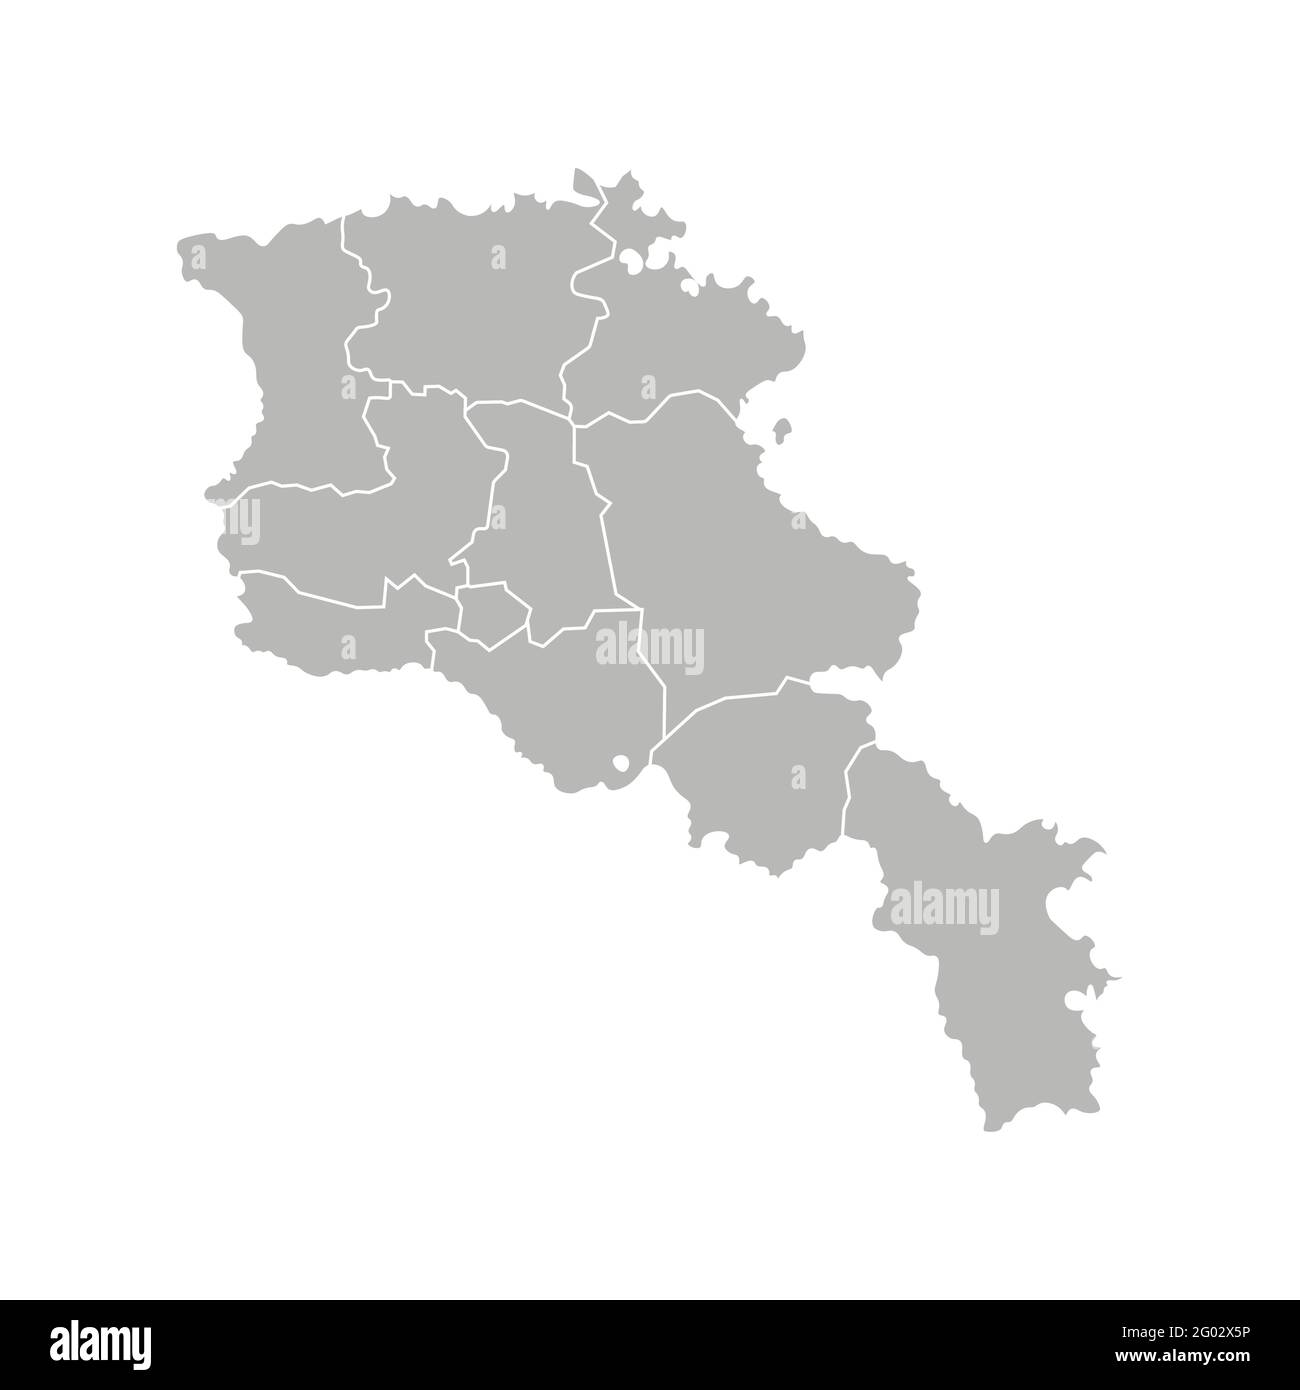 Vector isolated illustration of simplified administrative map of Armenia. Borders of the provinces (regions). Grey silhouettes. White outline. Stock Vector